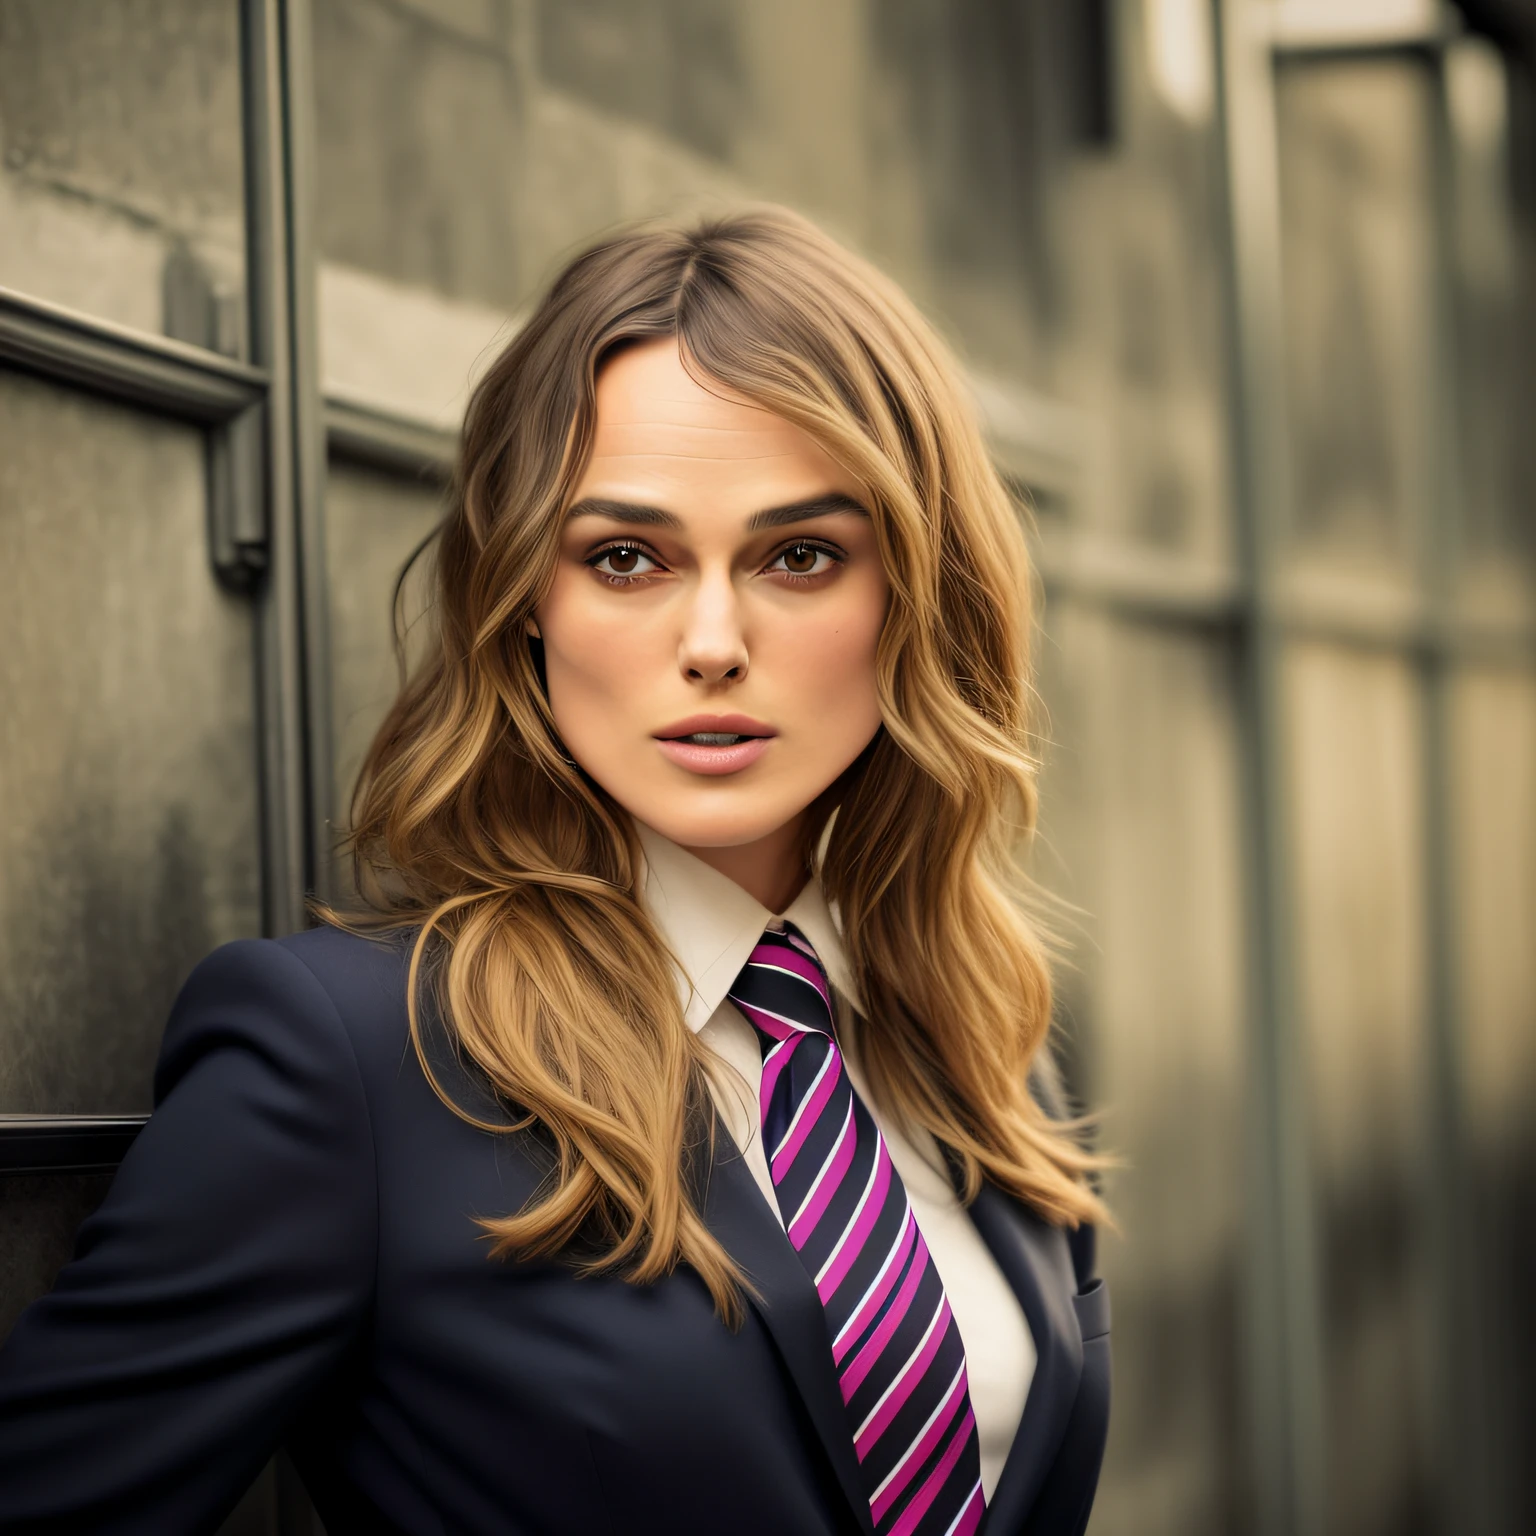 Keira Knightley in a Terno and tie leaning against a wall, girl in Terno, girl in a Terno, wearing a strict business Terno, in strict Terno, wearing Terno and tie, woman in business Terno, wearing a Terno and a tie, wearing a Terno and tie, wearing business Terno, in a strict Terno, Terno ， rosto perfeito, jovem mulher de negócios